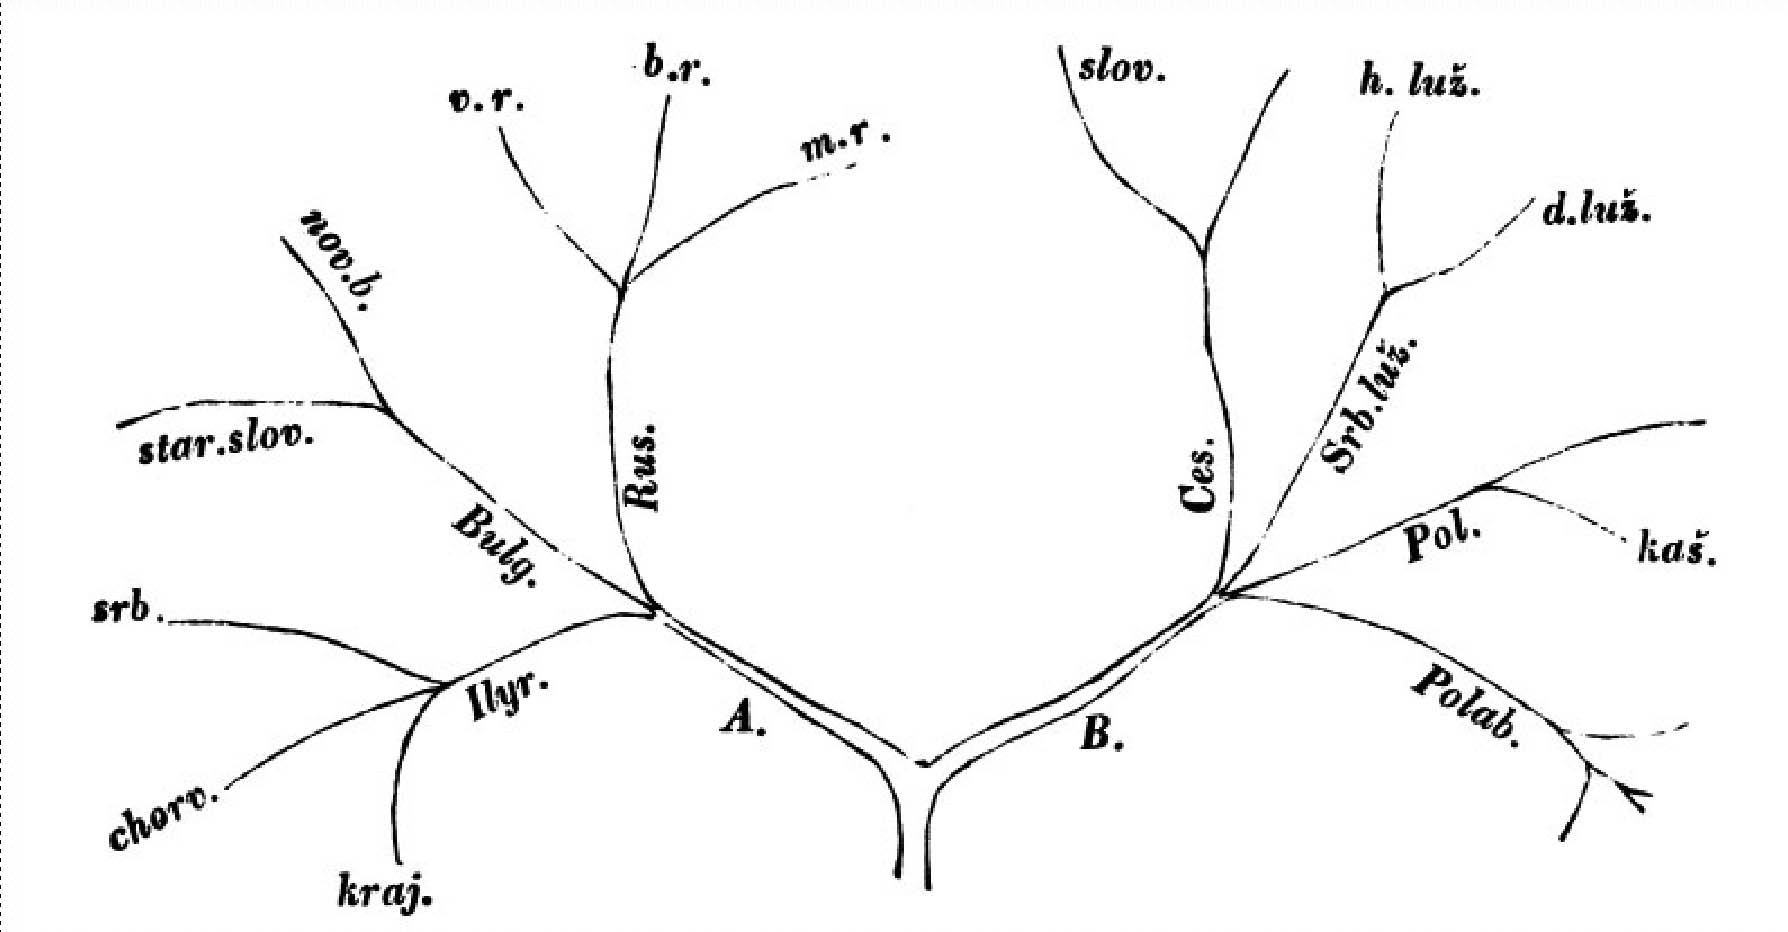 A tree diagram, branches labeled with abbreviations of language
                  names